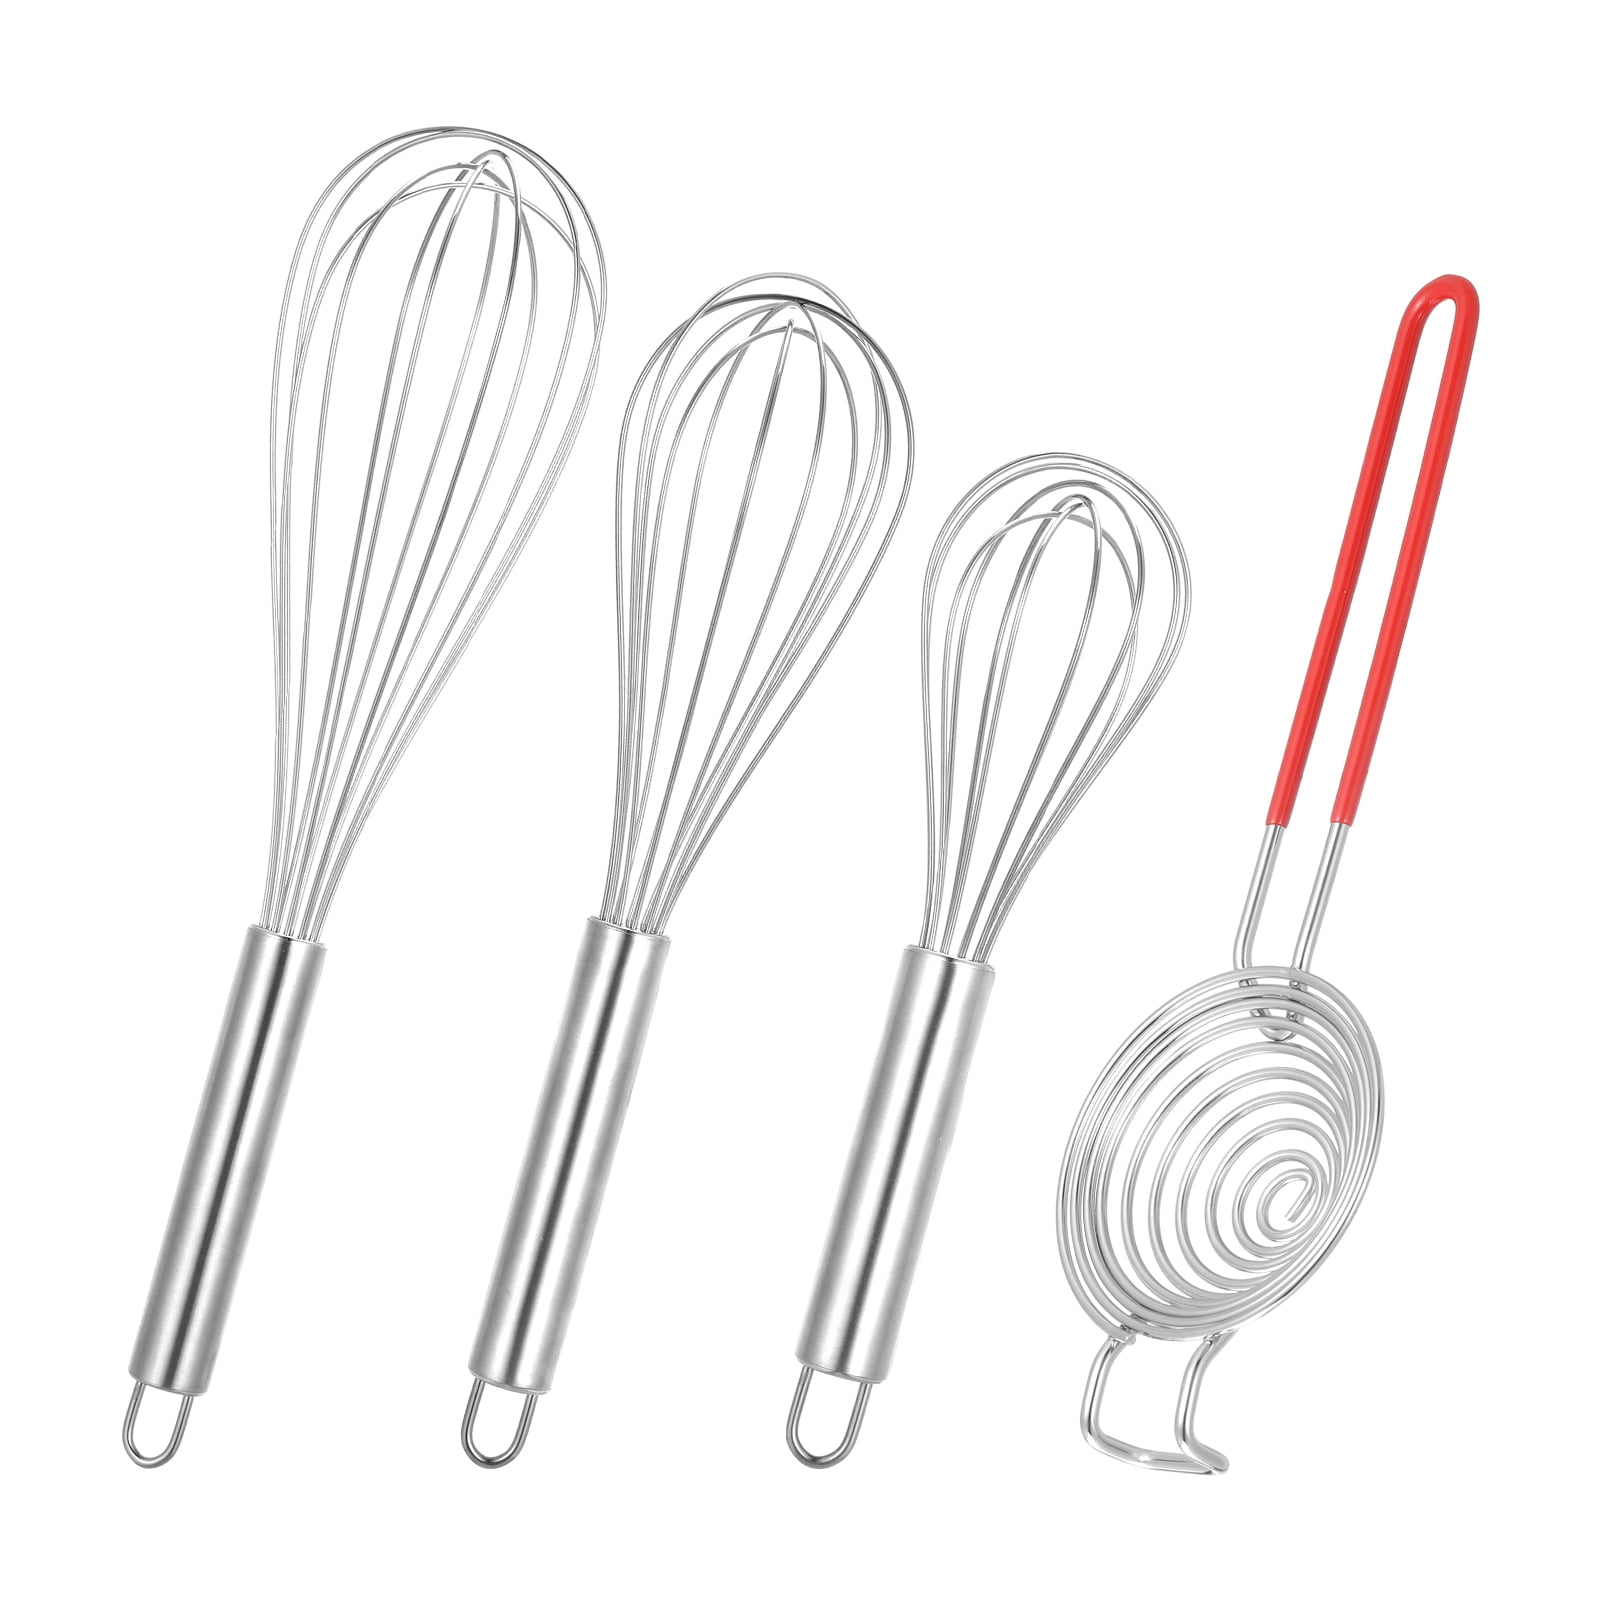  Whisk Wiper® - Wipe a Whisk Easily - Multipurpose Kitchen Tool,  Made In USA - Includes 11 Stainless-Steel Whisk - Cool Baking Gadget, A  Great Gift For Men and Women (Color